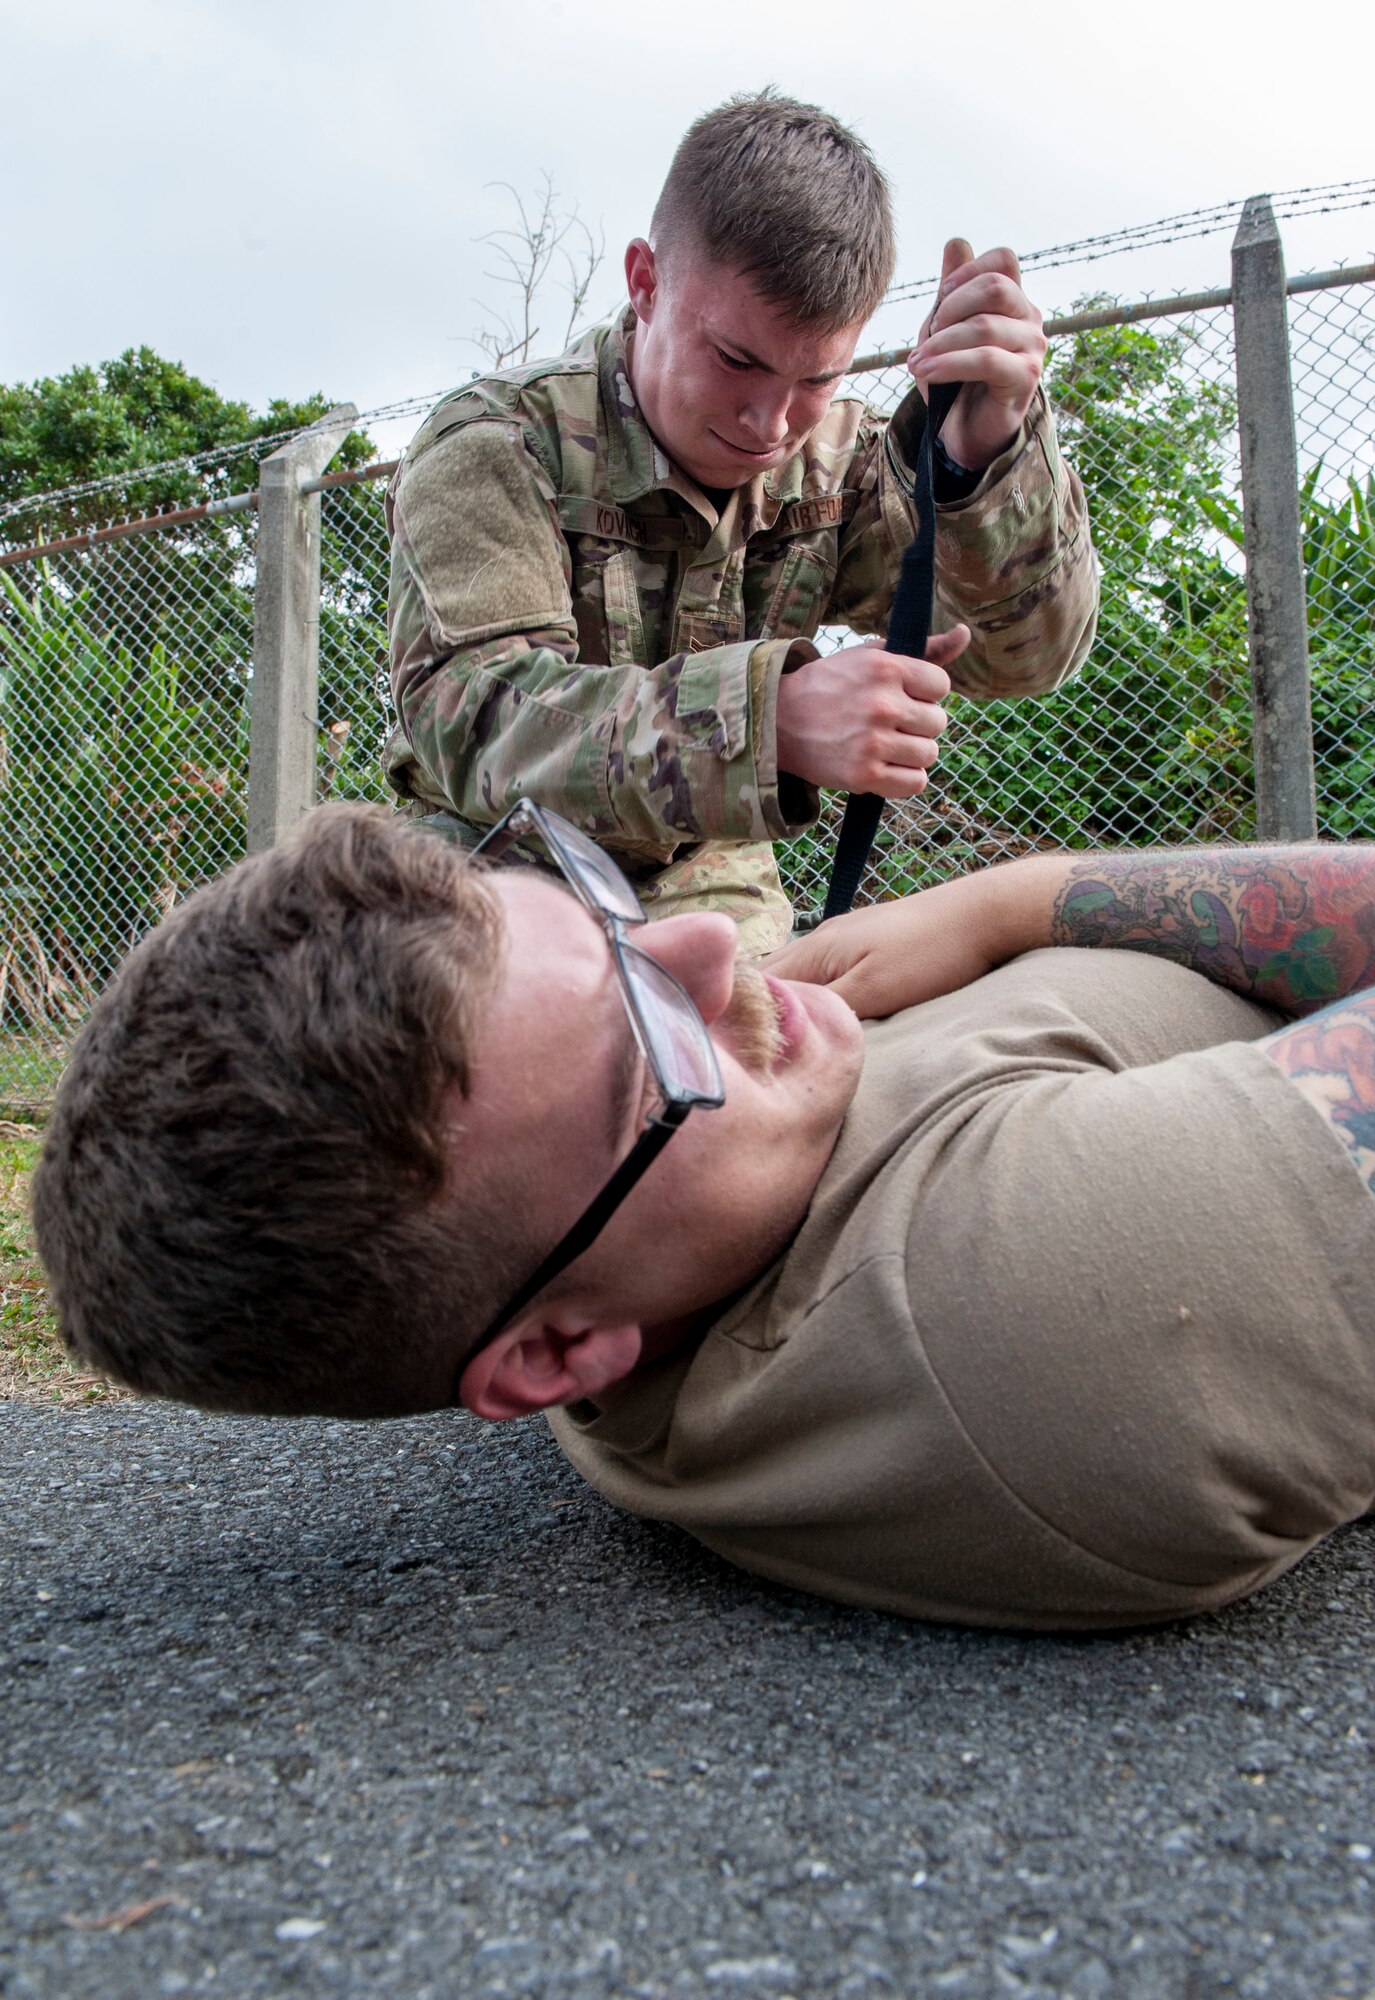 U.S. Air Force Airman 1st Class Kevin Kovach, 18th Security Forces Squadron response force leader, places a tourniquet on the simulated patient’s arm during the Defenders Challenge Feb. 13, 2020, at Kadena Air Base, Japan. This was one of several events participants had to overcome during the Defenders Challenge varying from physical exercise, a three-mile run, to weapon assembly. (U.S. Air Force photo by Naoto Anazawa)